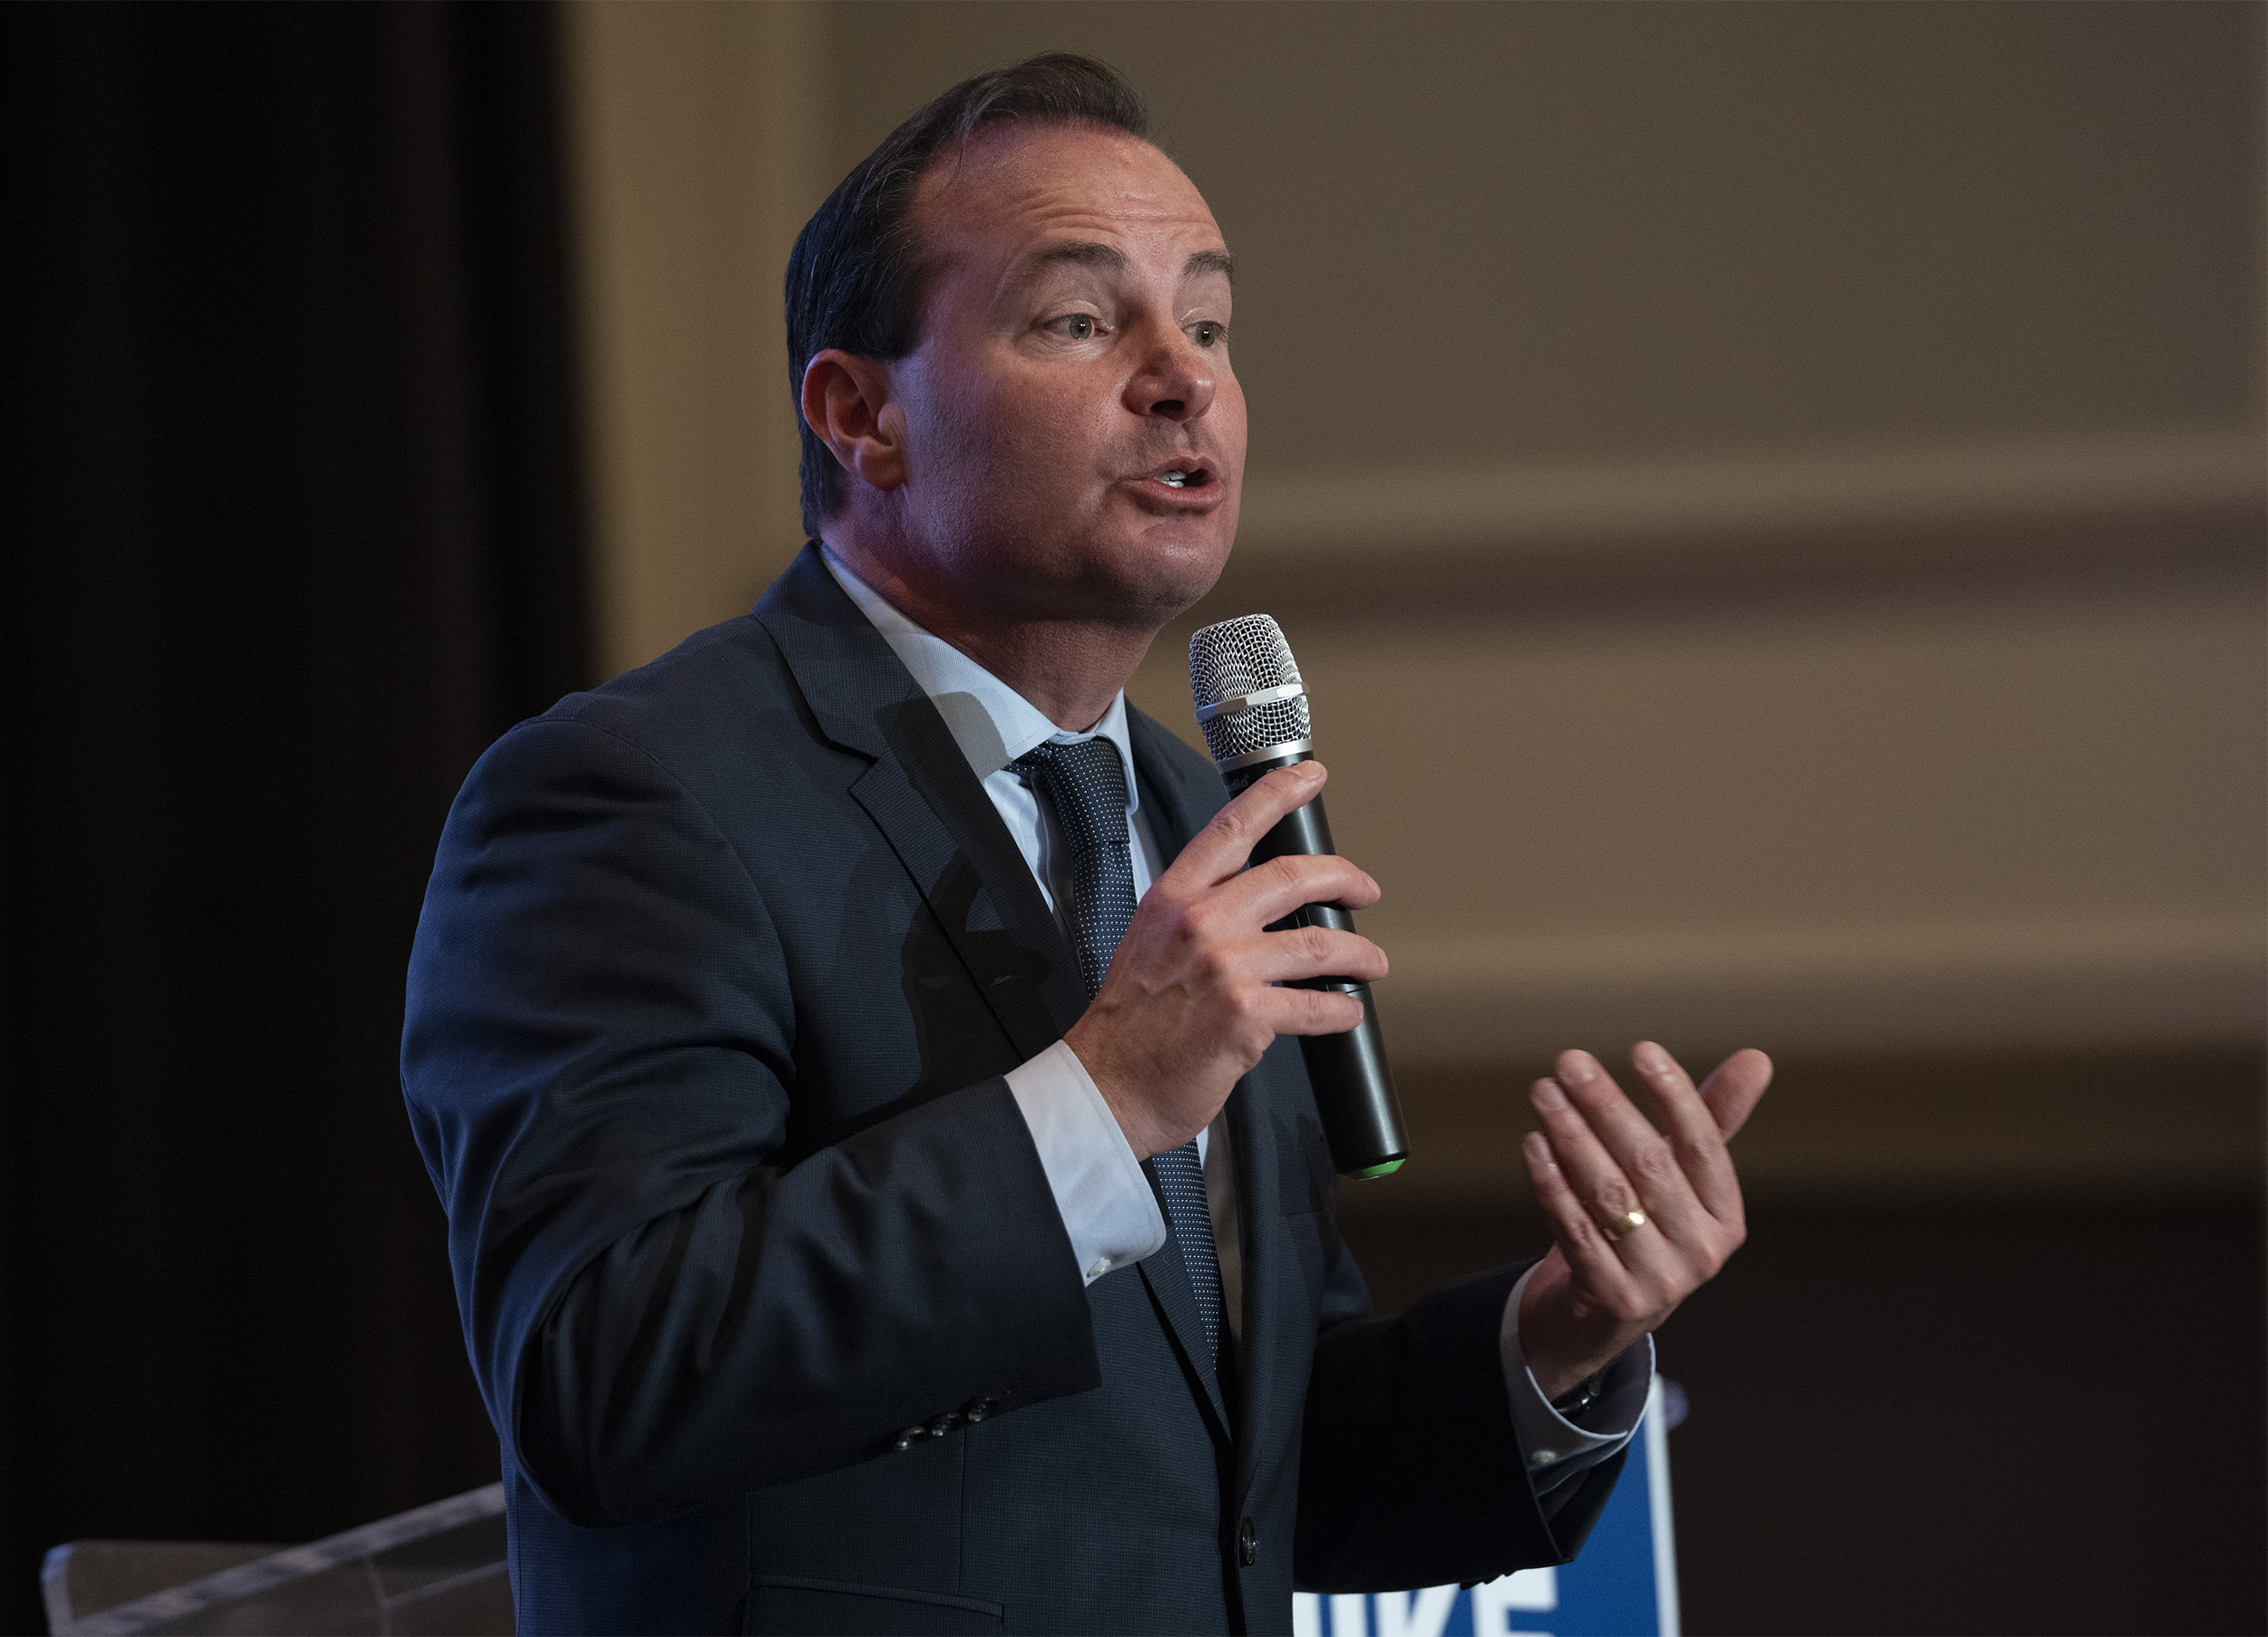 New poll shows Mike Lee with double-digit lead over Evan McMullin, but  pollster says the independent is no typical opponent